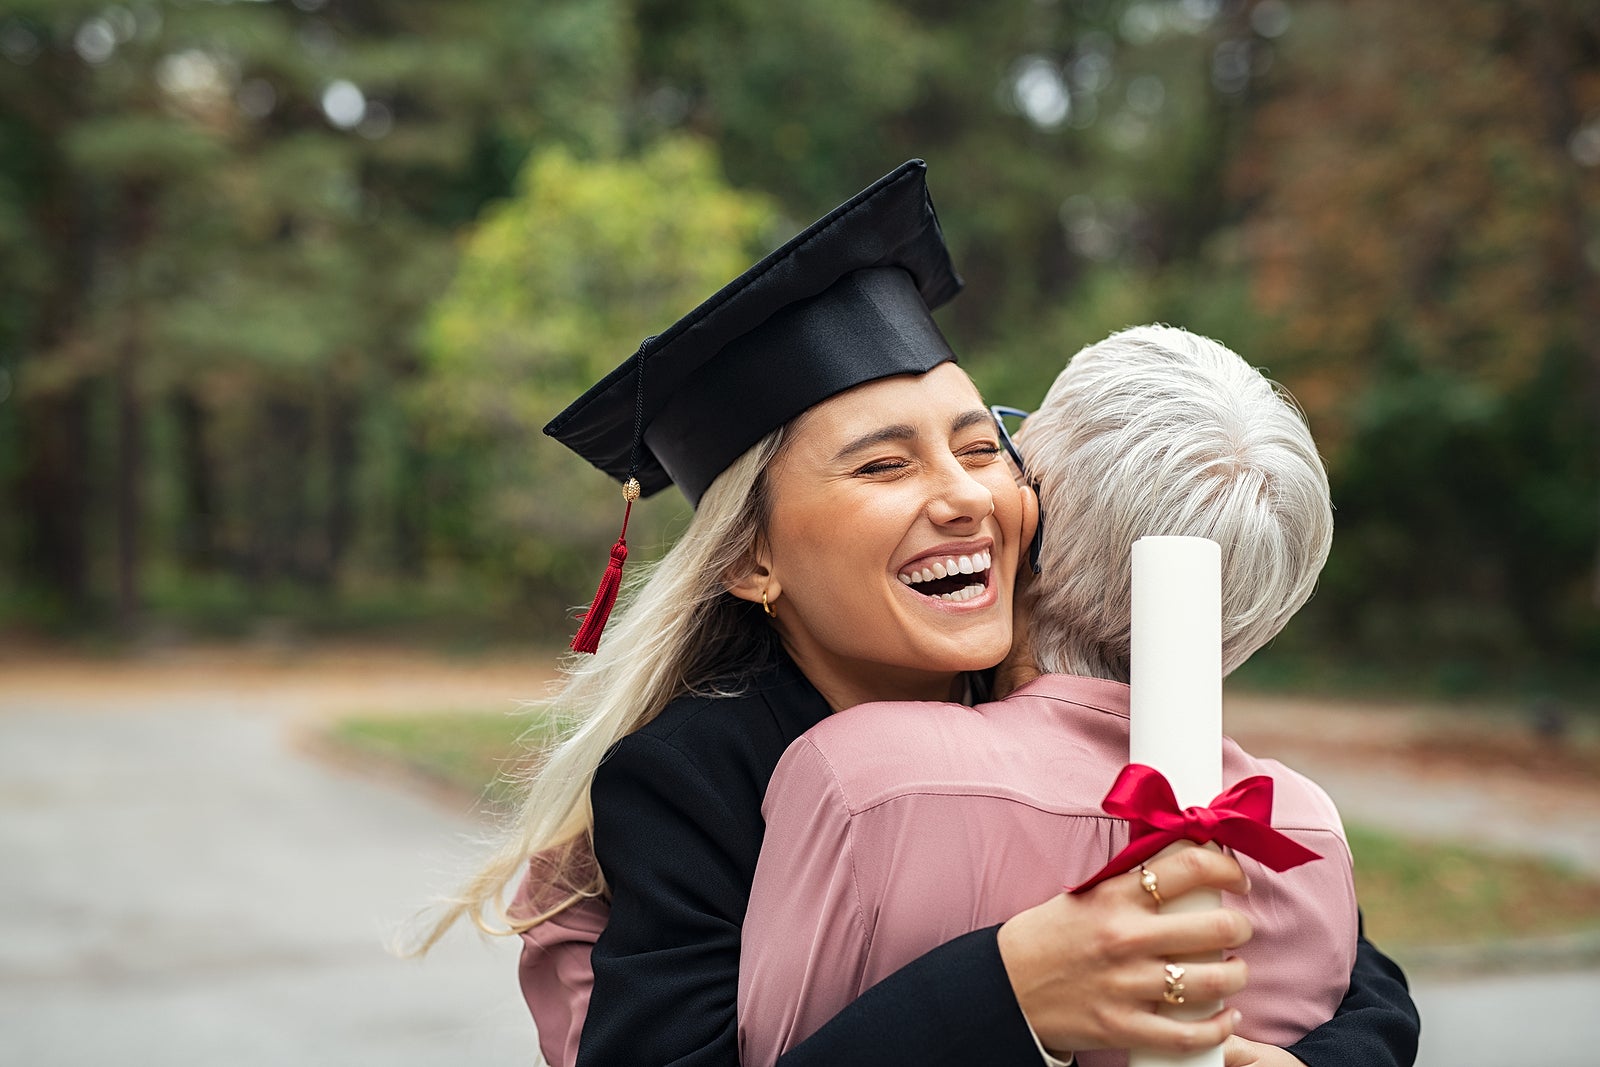 Enthusiastic graduated daughter holding degree hugging mother in campus. Young female student graduate hugging her mom at graduation ceremony. Excited college student with the graduation gown and hat.